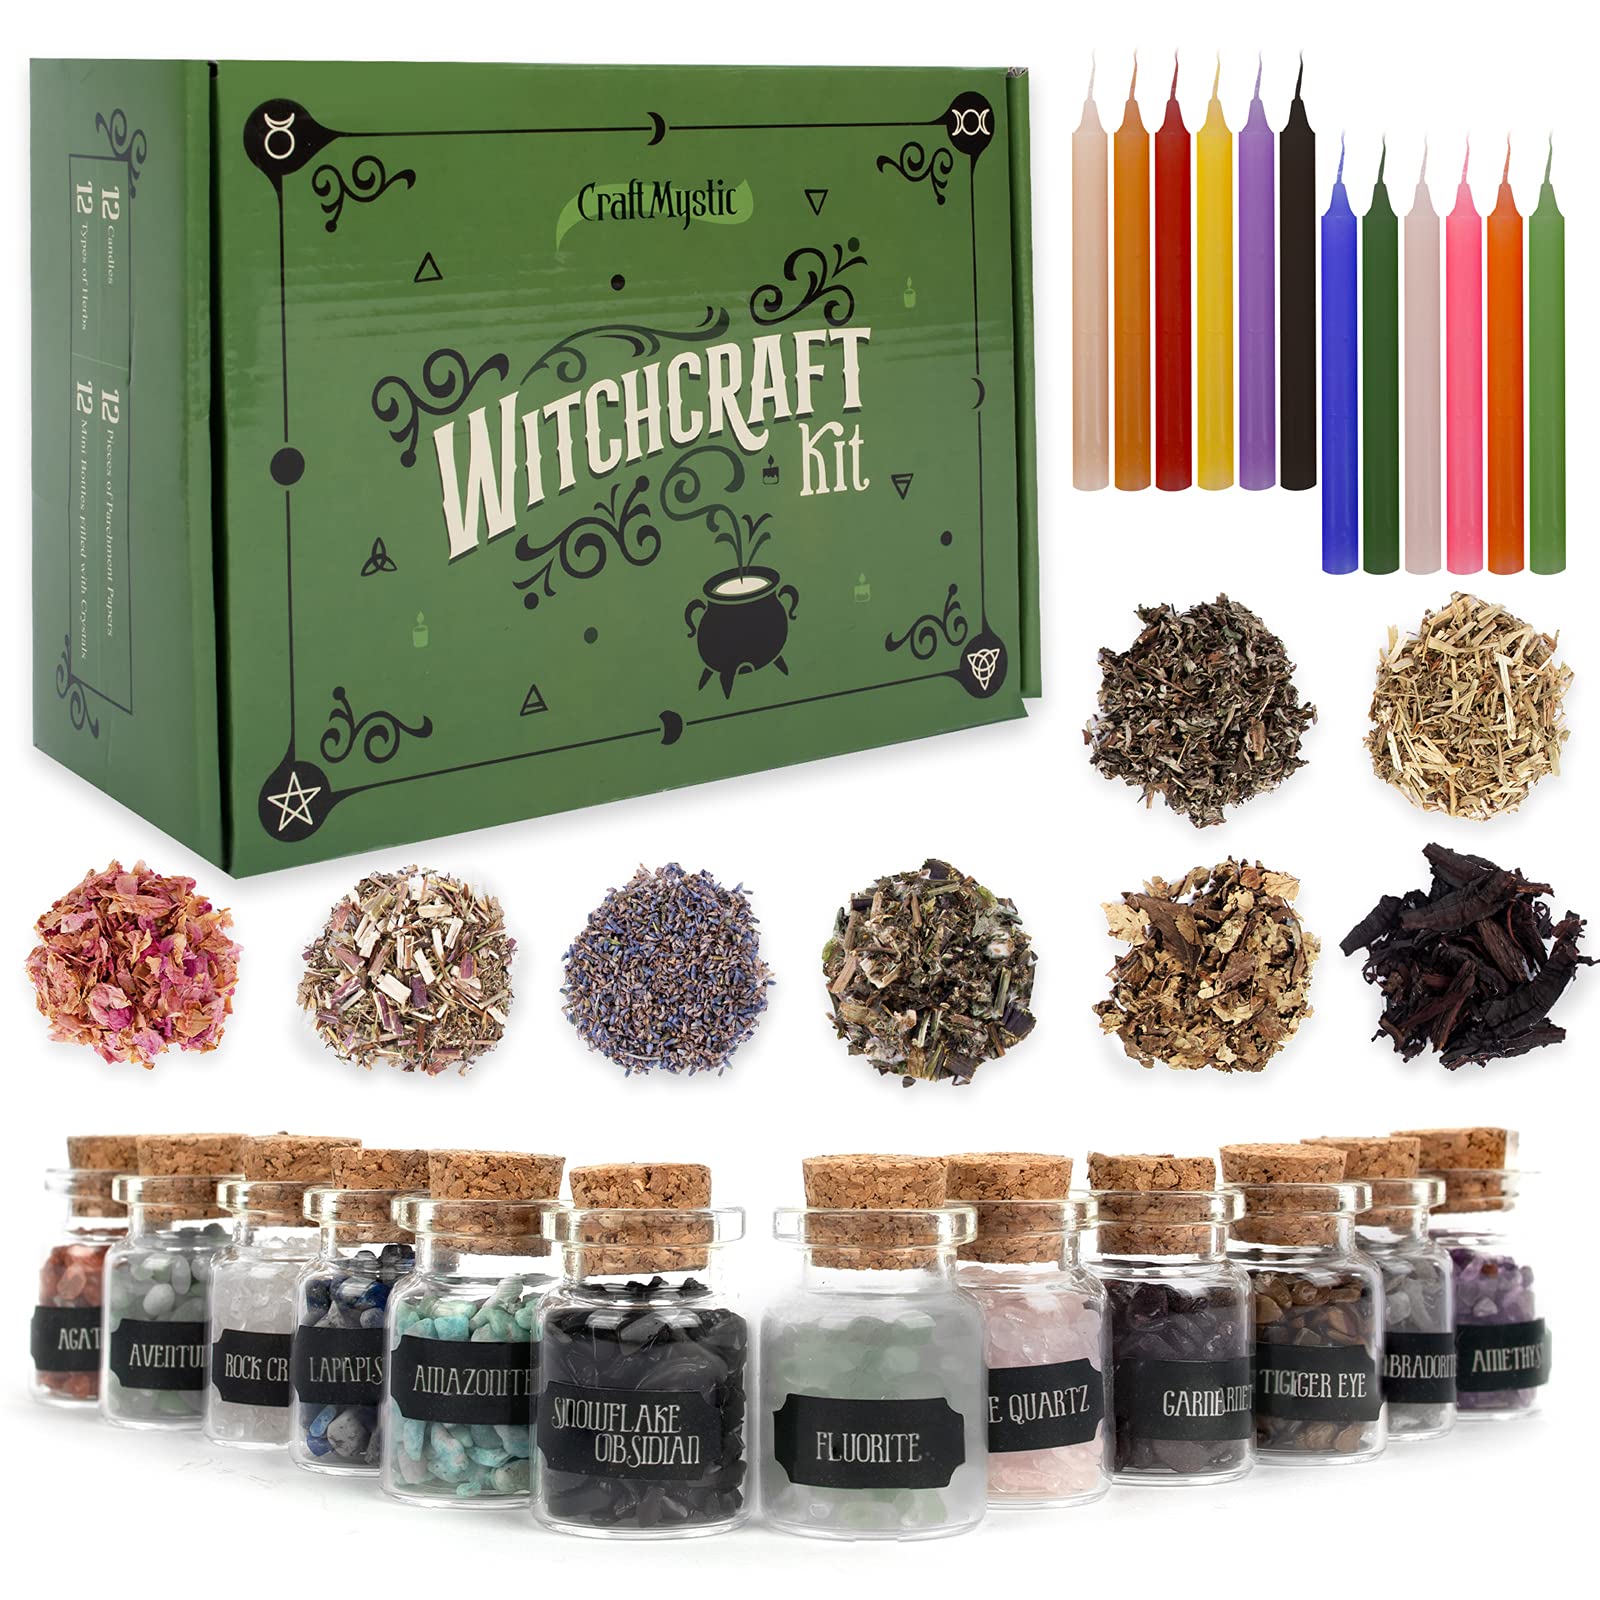 Witchcraft Supplies Box for Wiccan Spells – 36 Pack of Crystals Dried Herbs and Colored Magic Candles for Beginners Experienced Witches Pagan Spell-Versatile Tools Gifts Packaging Baby Toy Craft